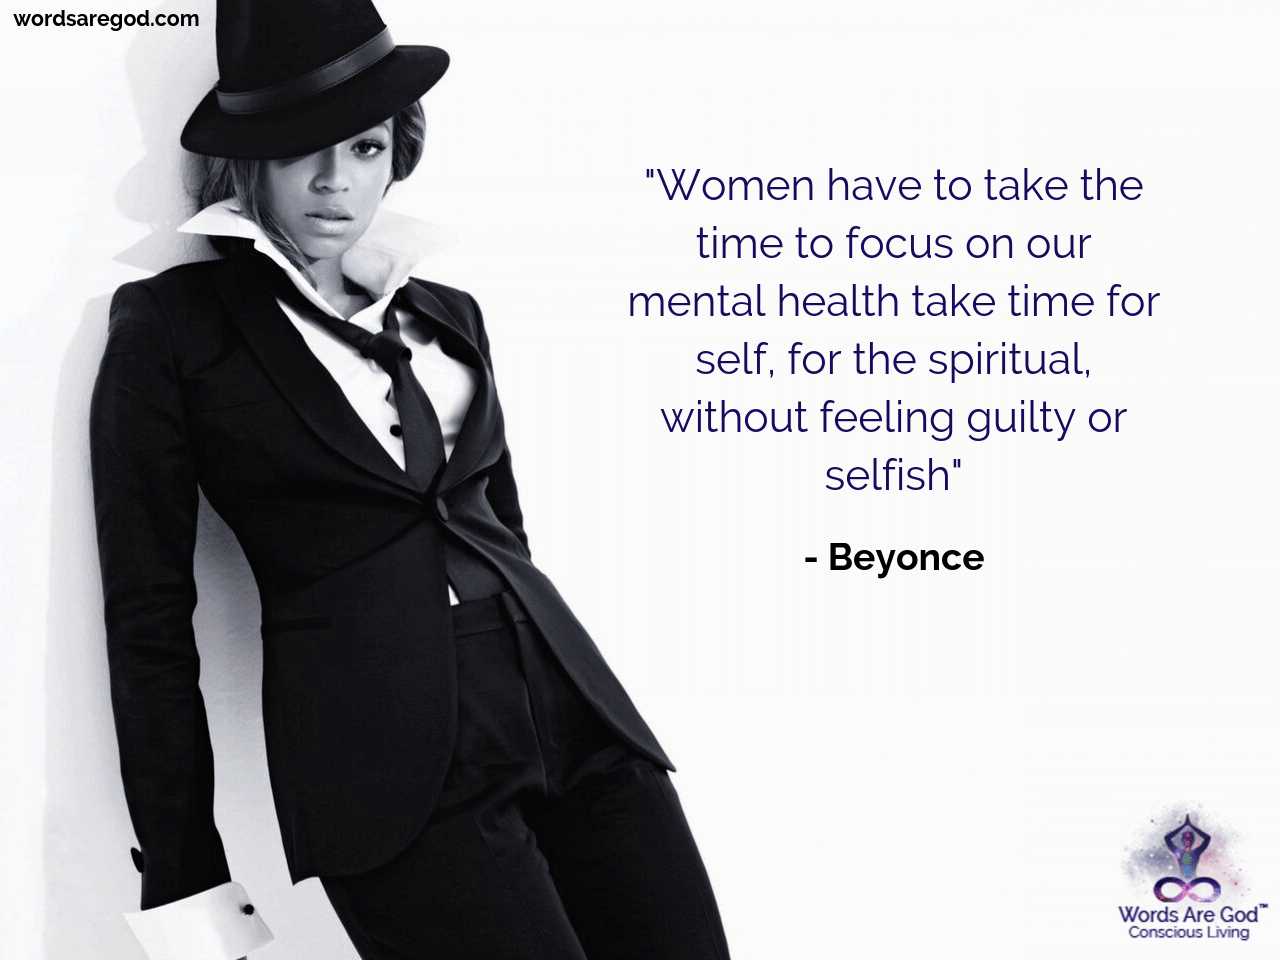 Beyonce Motivational Quote